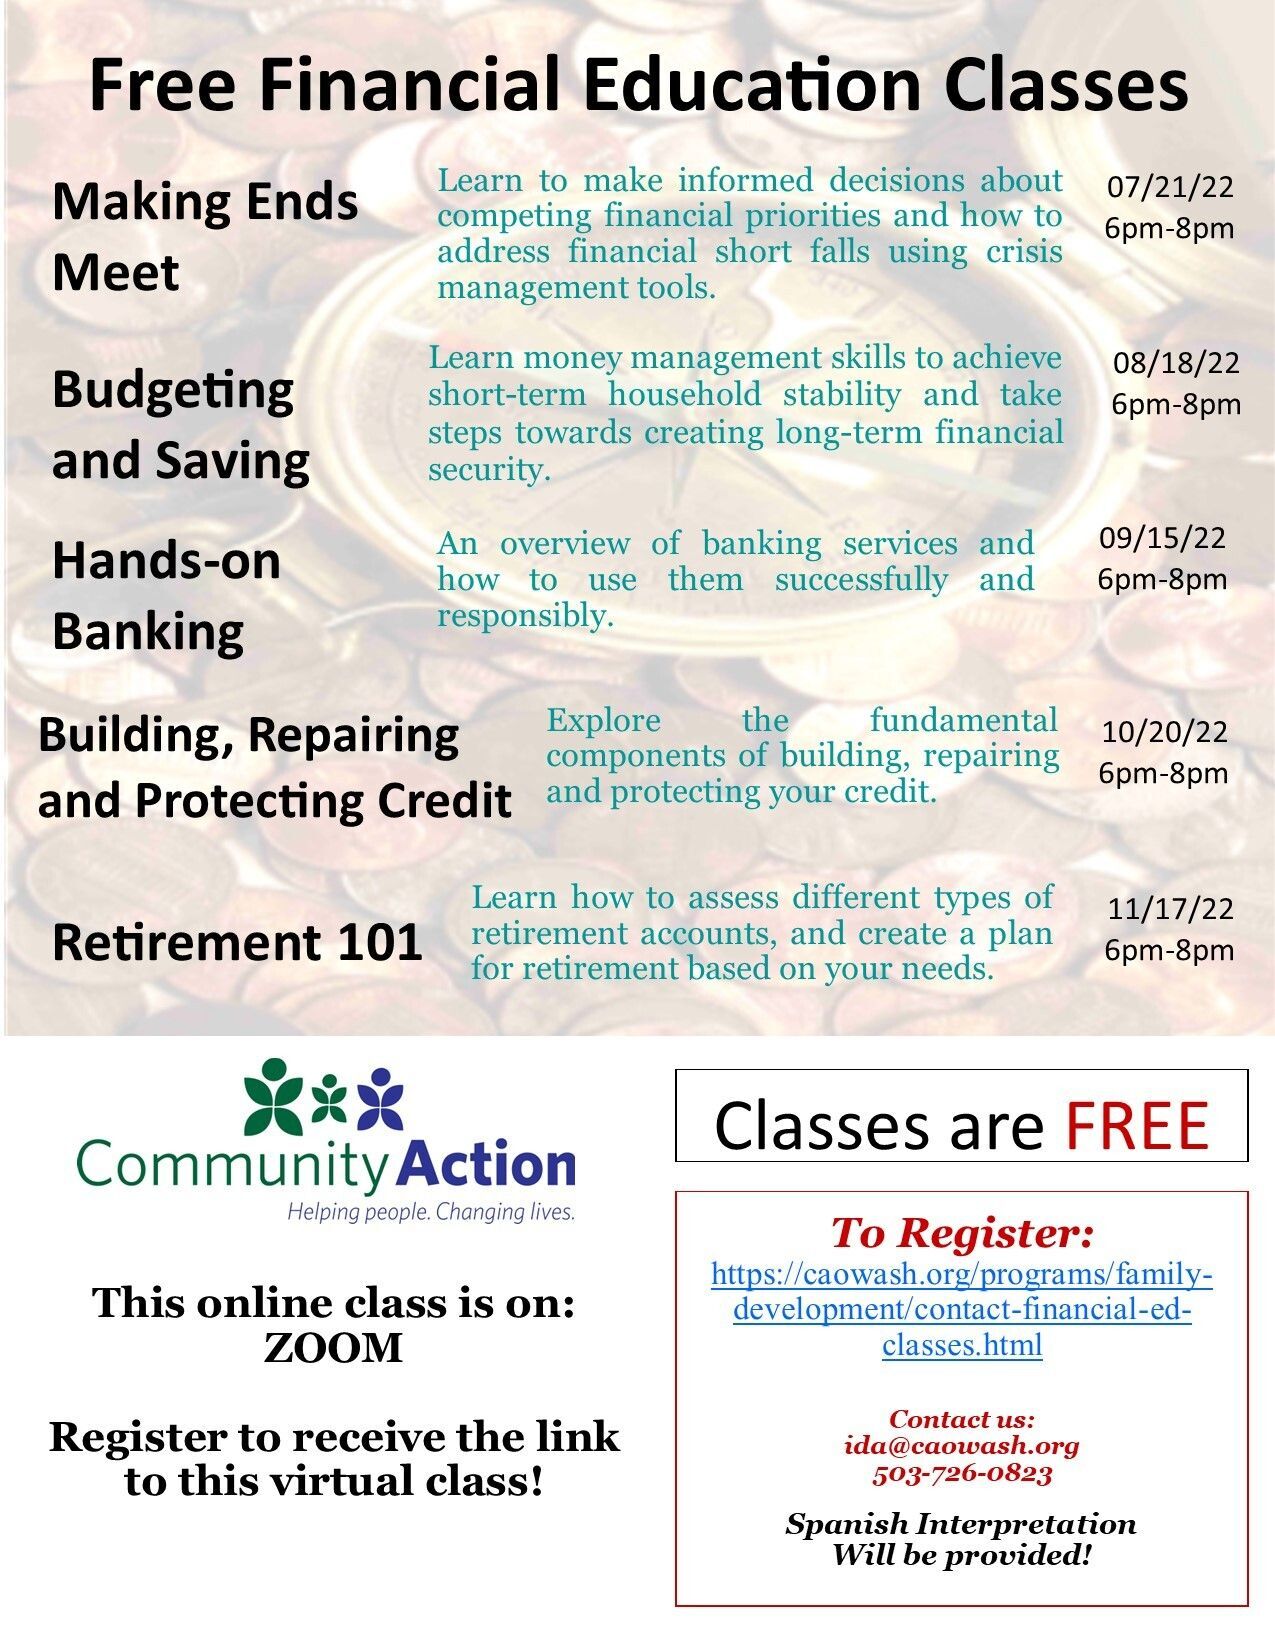 Schedule for the Financial Education Class